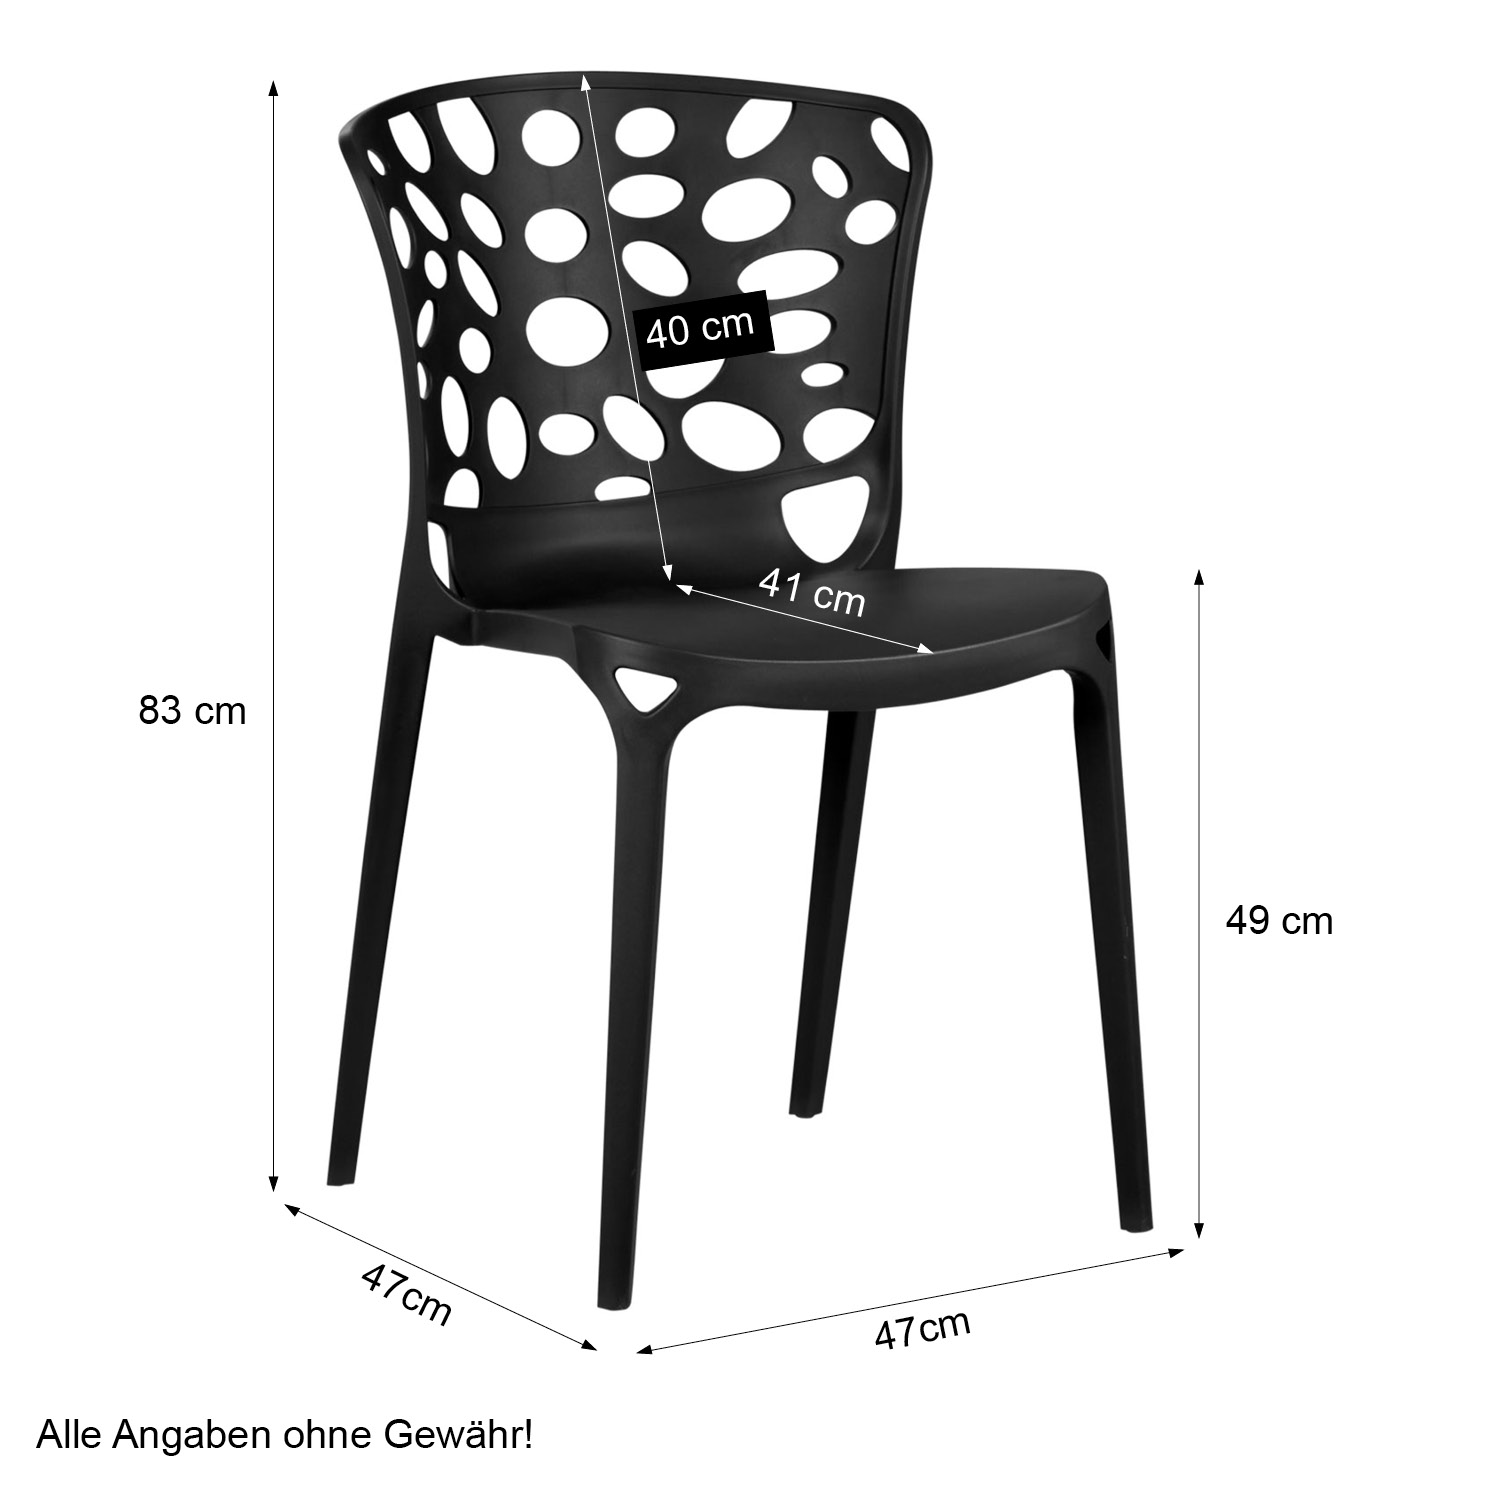 Garden chair Set of 4 Modern Black Camping chairs Outdoor chairs Plastic Stacking chairs Kitchen chairs